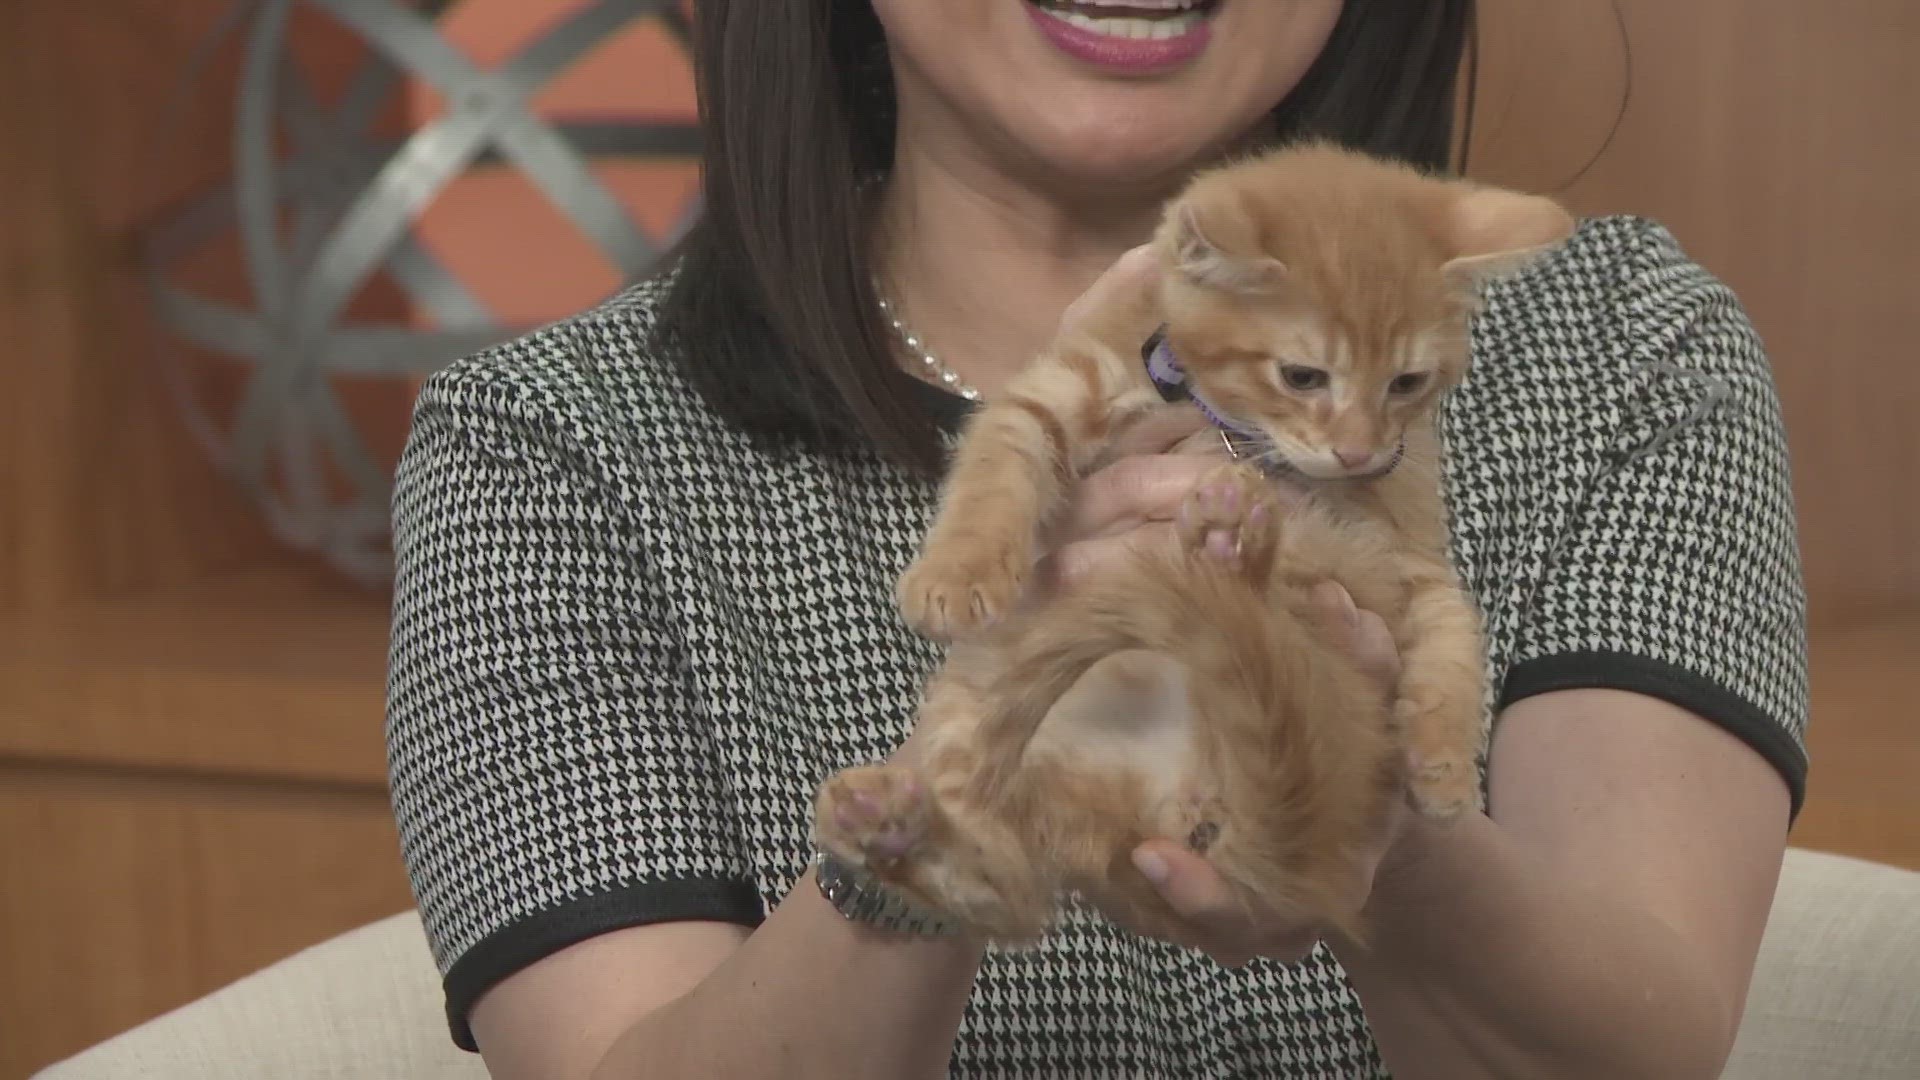 Every Friday on KVUE Midday, we shine a spotlight on an adorable animal looking for a loving home.